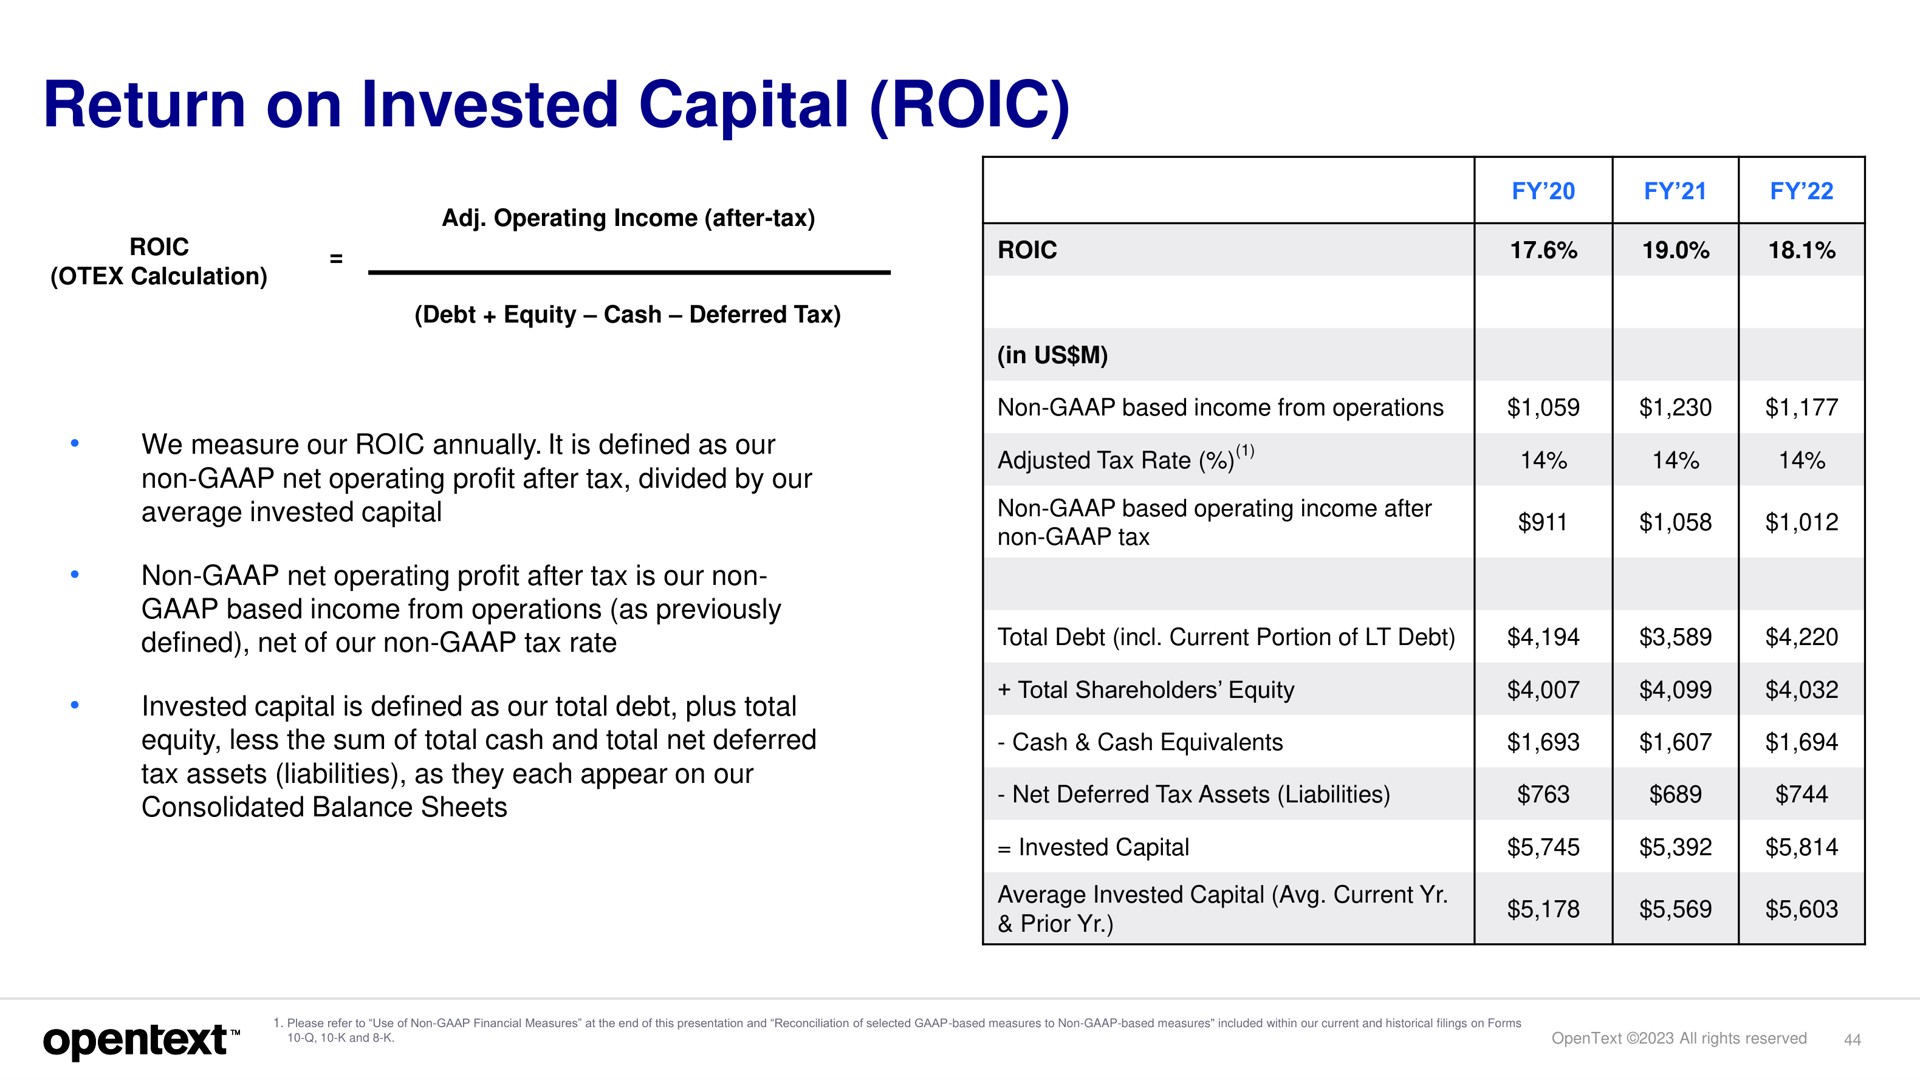 return on invested capital | OpenText